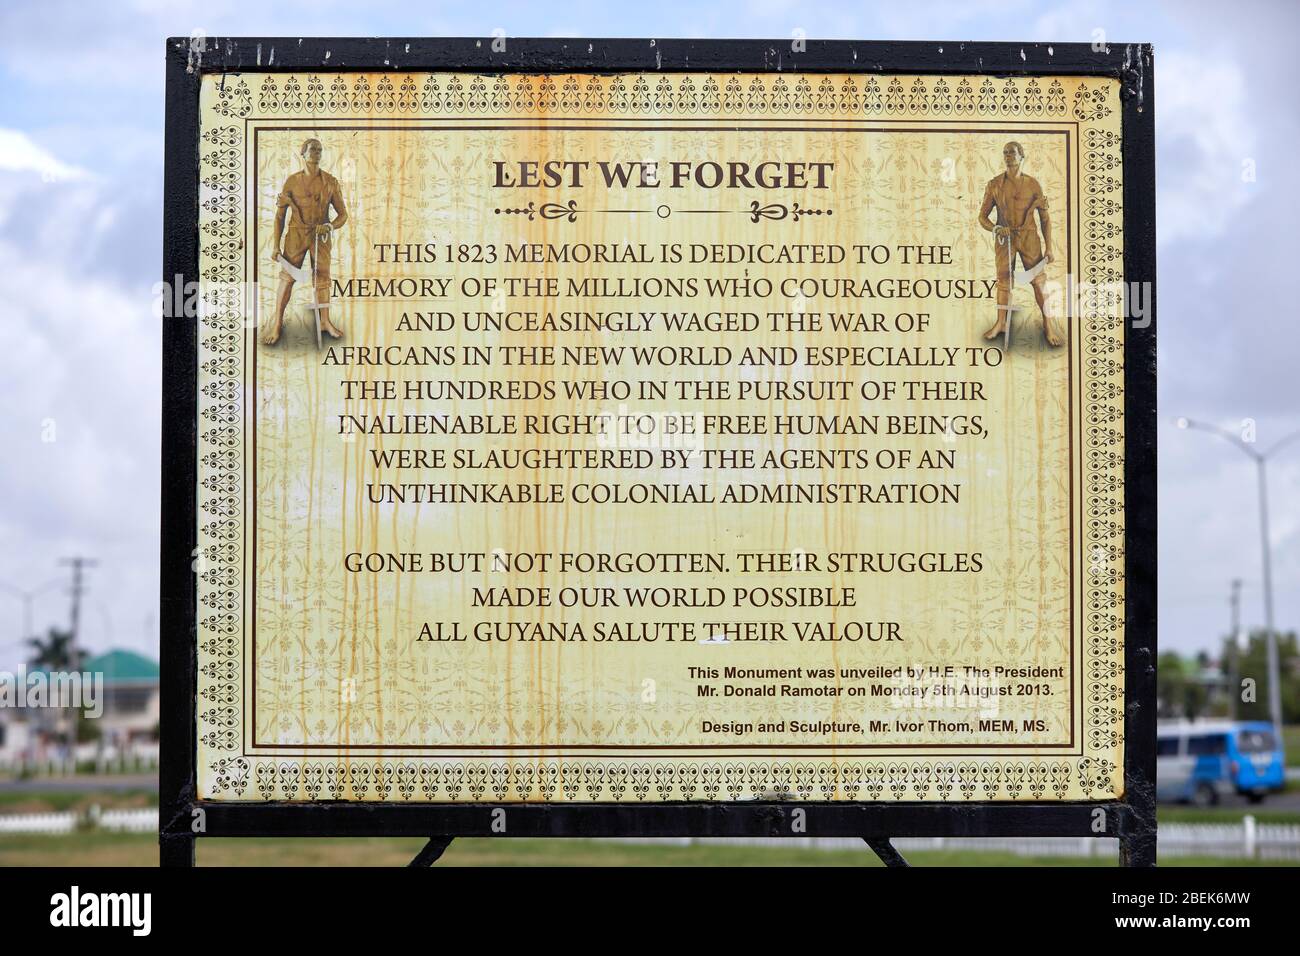 Lest We Forget plaque at 1823 Monument in Georgetown Guyana, South America Stock Photo